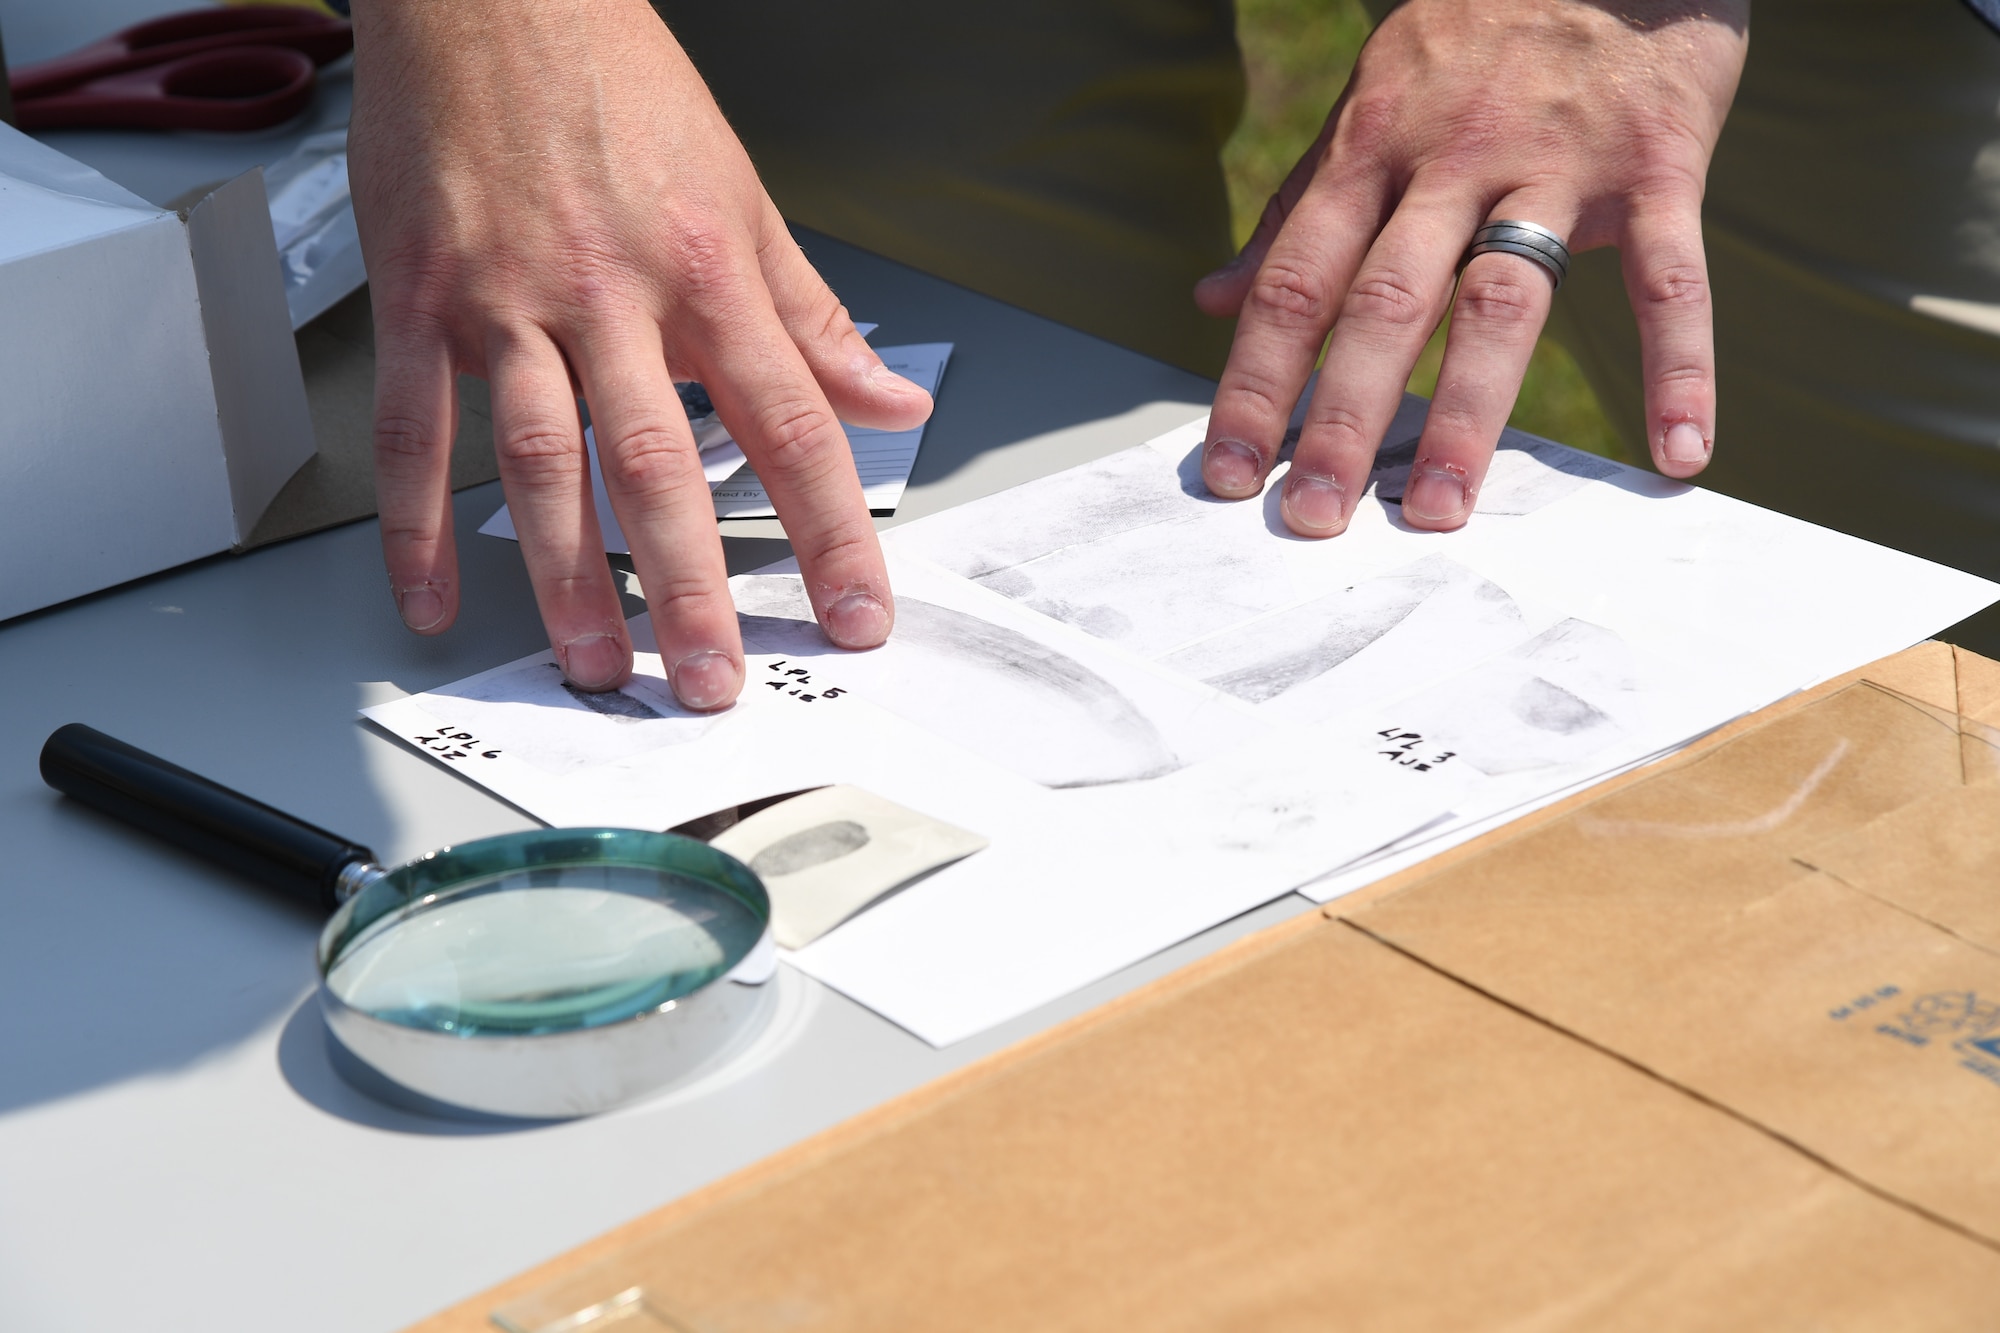 A U.S. Air Force Office of Special Investigations, Detachment 407, special agent displays finger print examples during Police Week defender demo day at Keesler Air Force Base, Mississippi, May 18, 2022. The event was held during National Police Week, recognizing the men and women in law enforcement. (U.S. Air Force photo by Kemberly Groue)